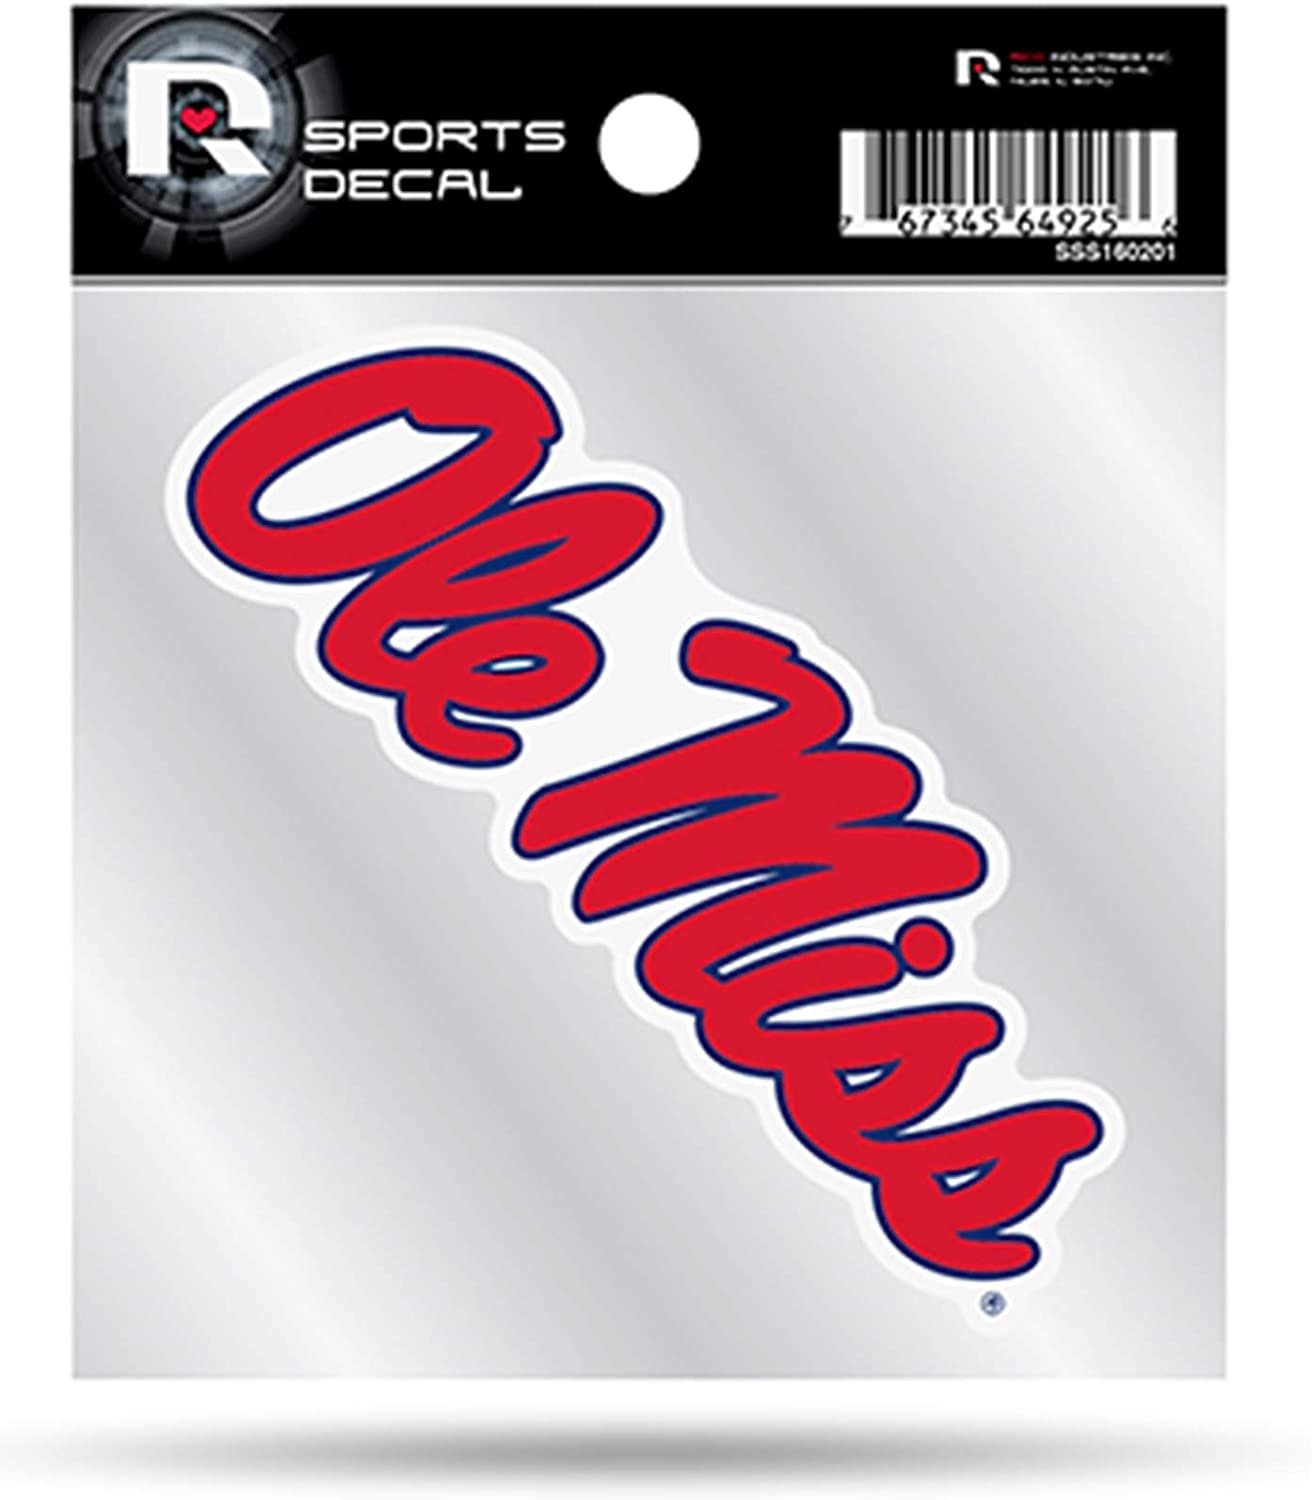 Mississippi Rebels Ole Miss Premium 4x4 Decal with Clear Backing Flat Vinyl Auto Home Sticker University of